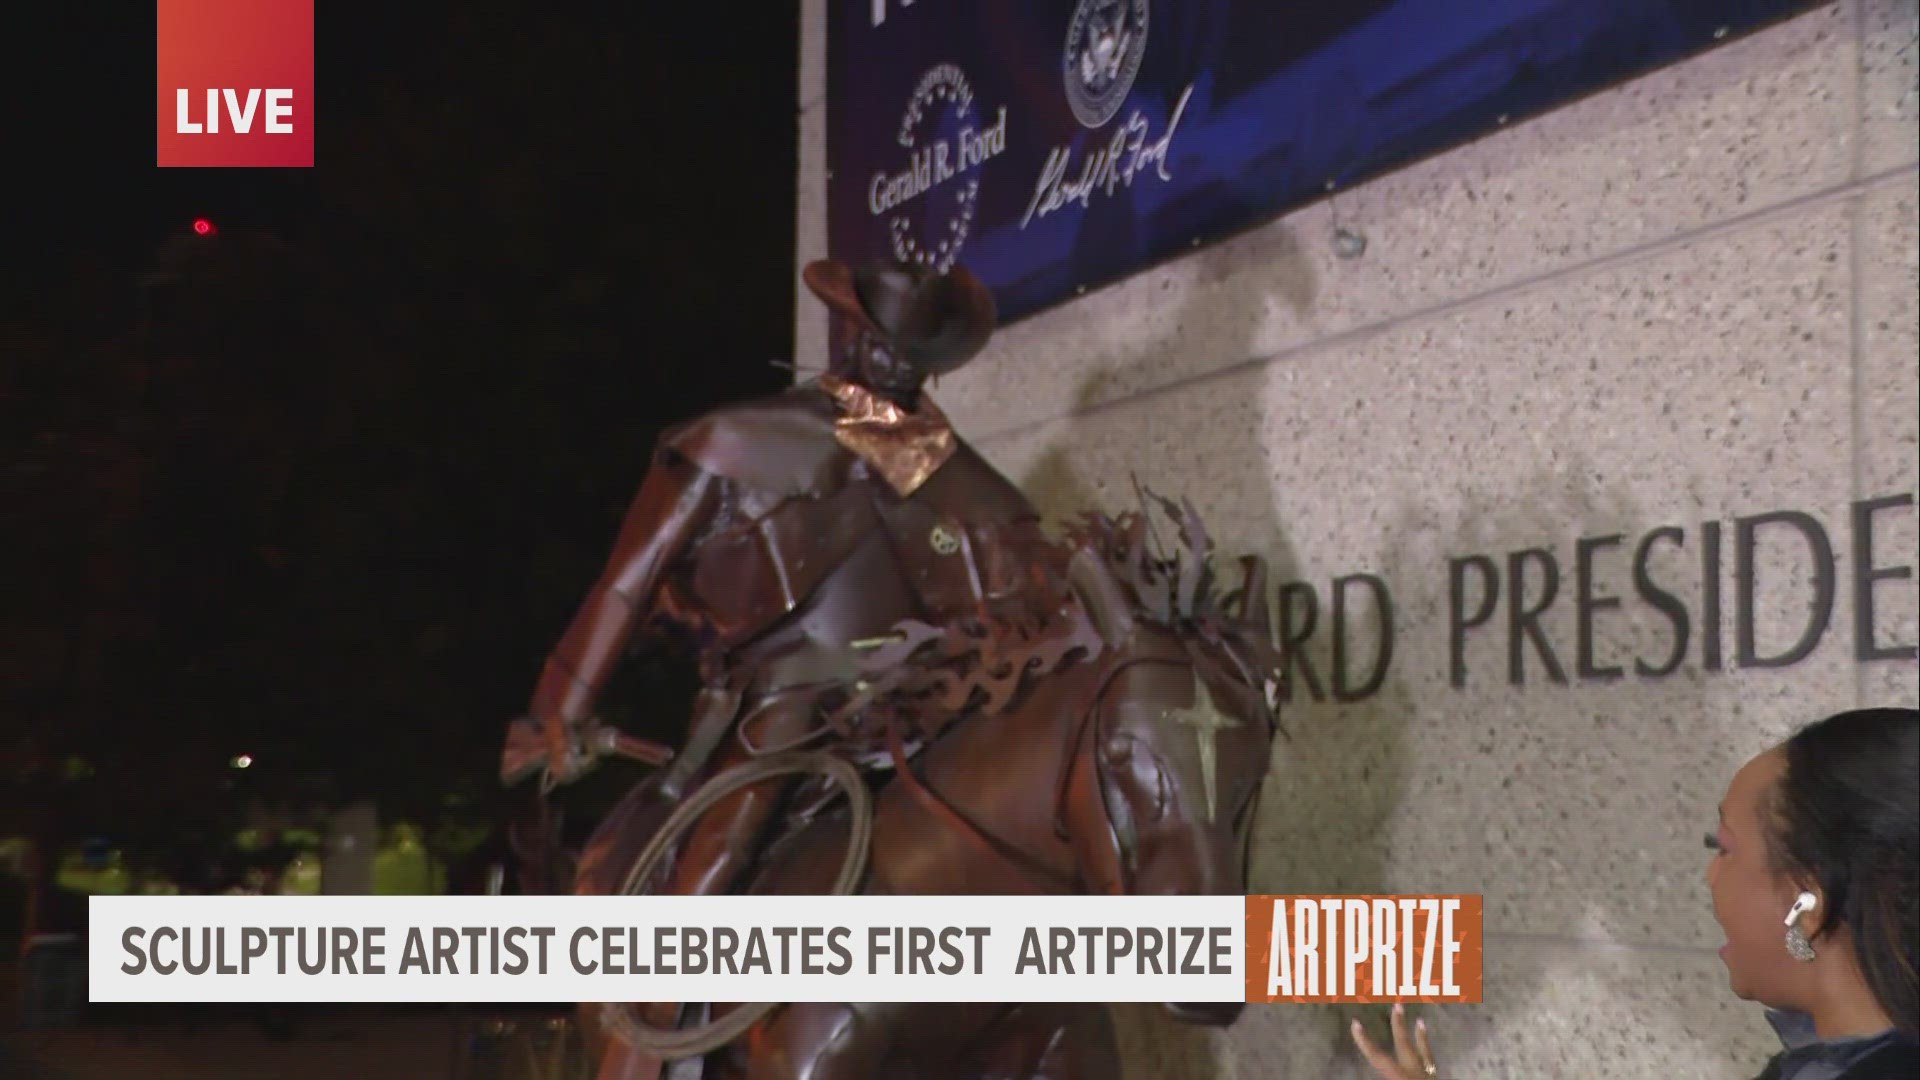 Hundreds of artists have brought their work to Grand Rapids for the 14th annual ArtPrize festival.